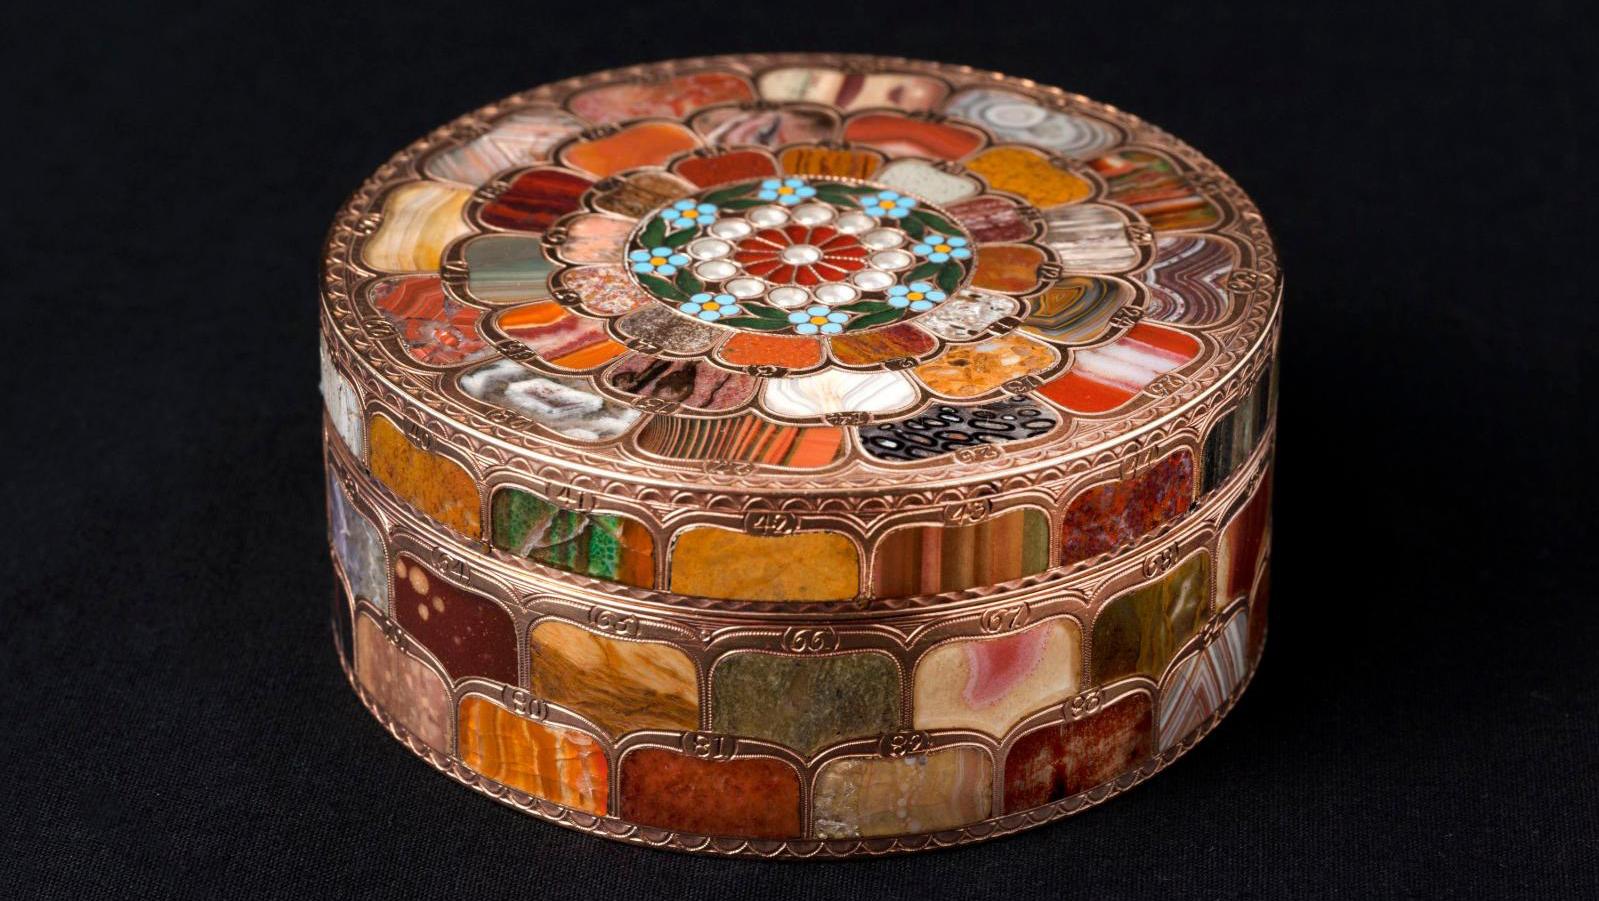 Johann-Christian Neuber (1736-1808), box, c. 1780, hardstone marquetry.CCO Paris... Precious Objects from the 18th-Century at the Musée Cognacq-Jay